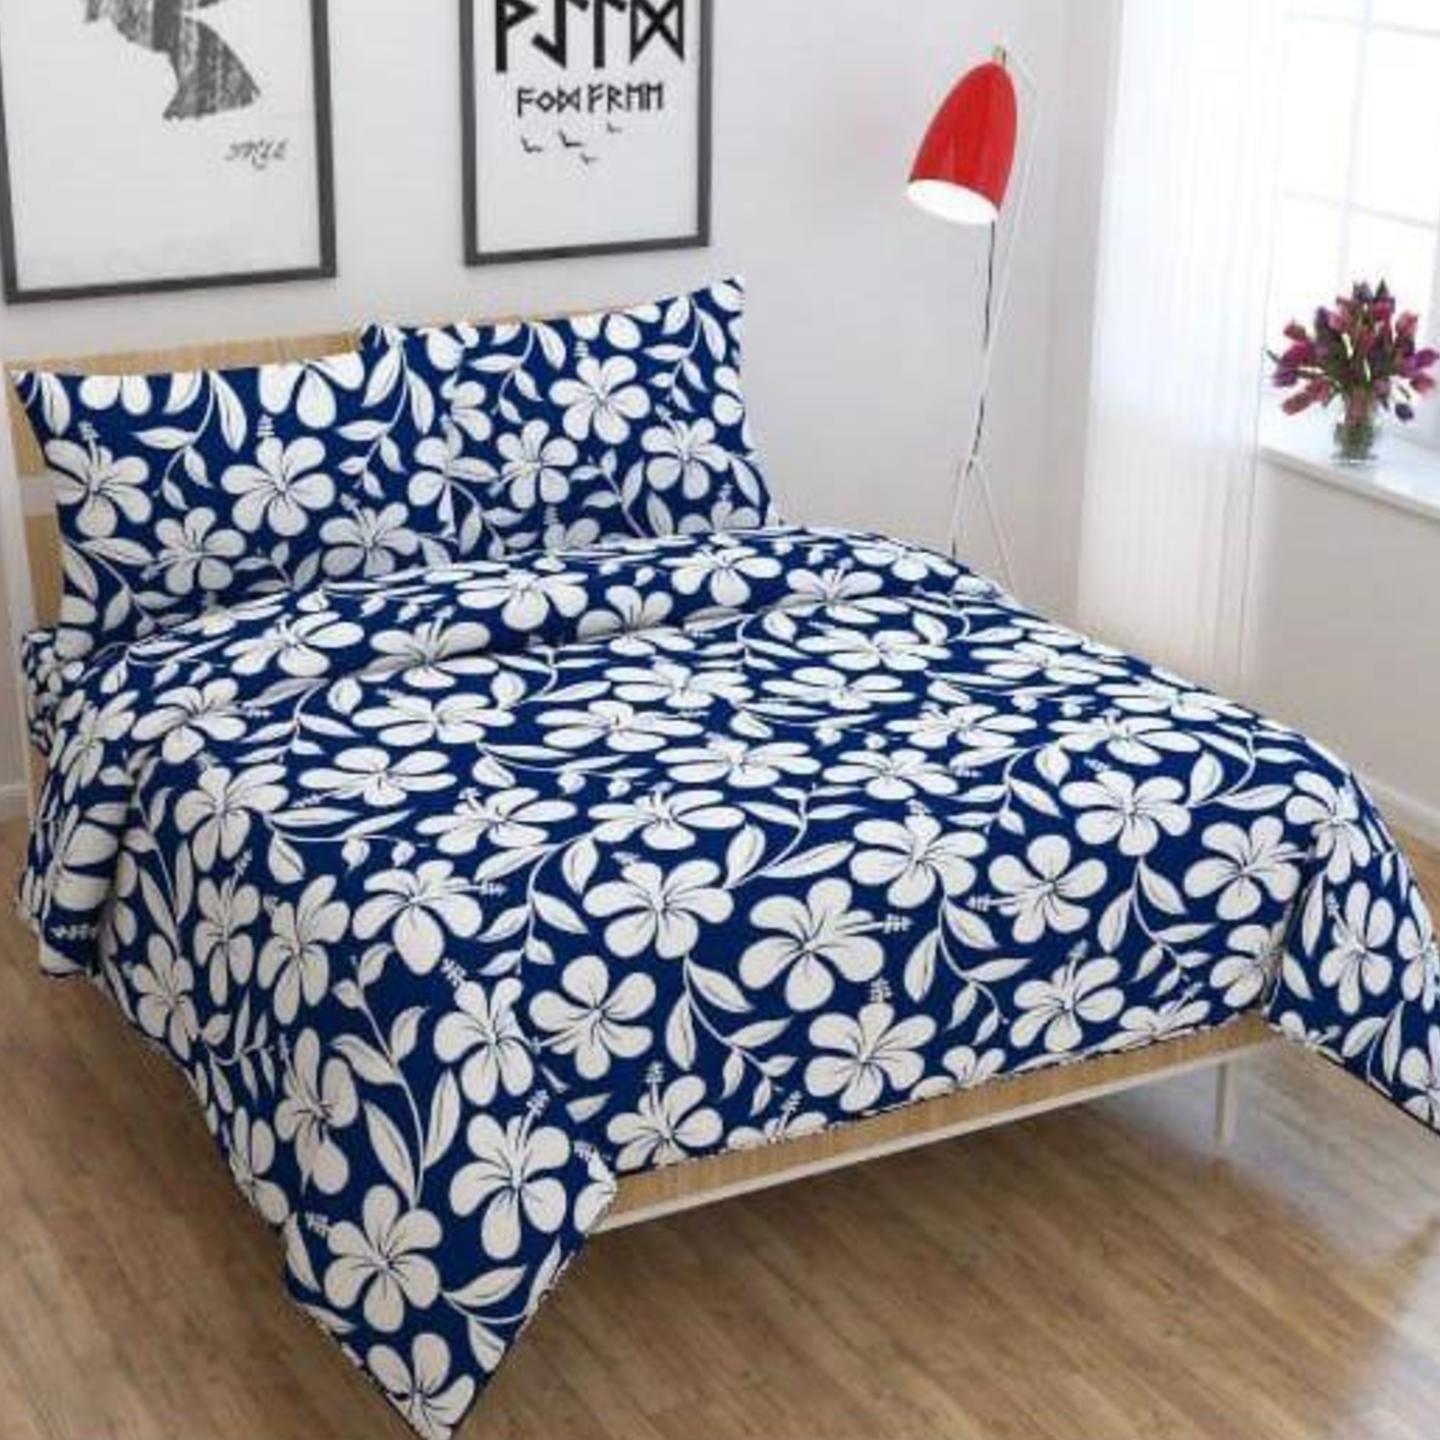 HandTex Home Flower Printed Double bedsheets 90x100 inch (Pack of 1 Bedsheet with 2 Pillow Covers) 